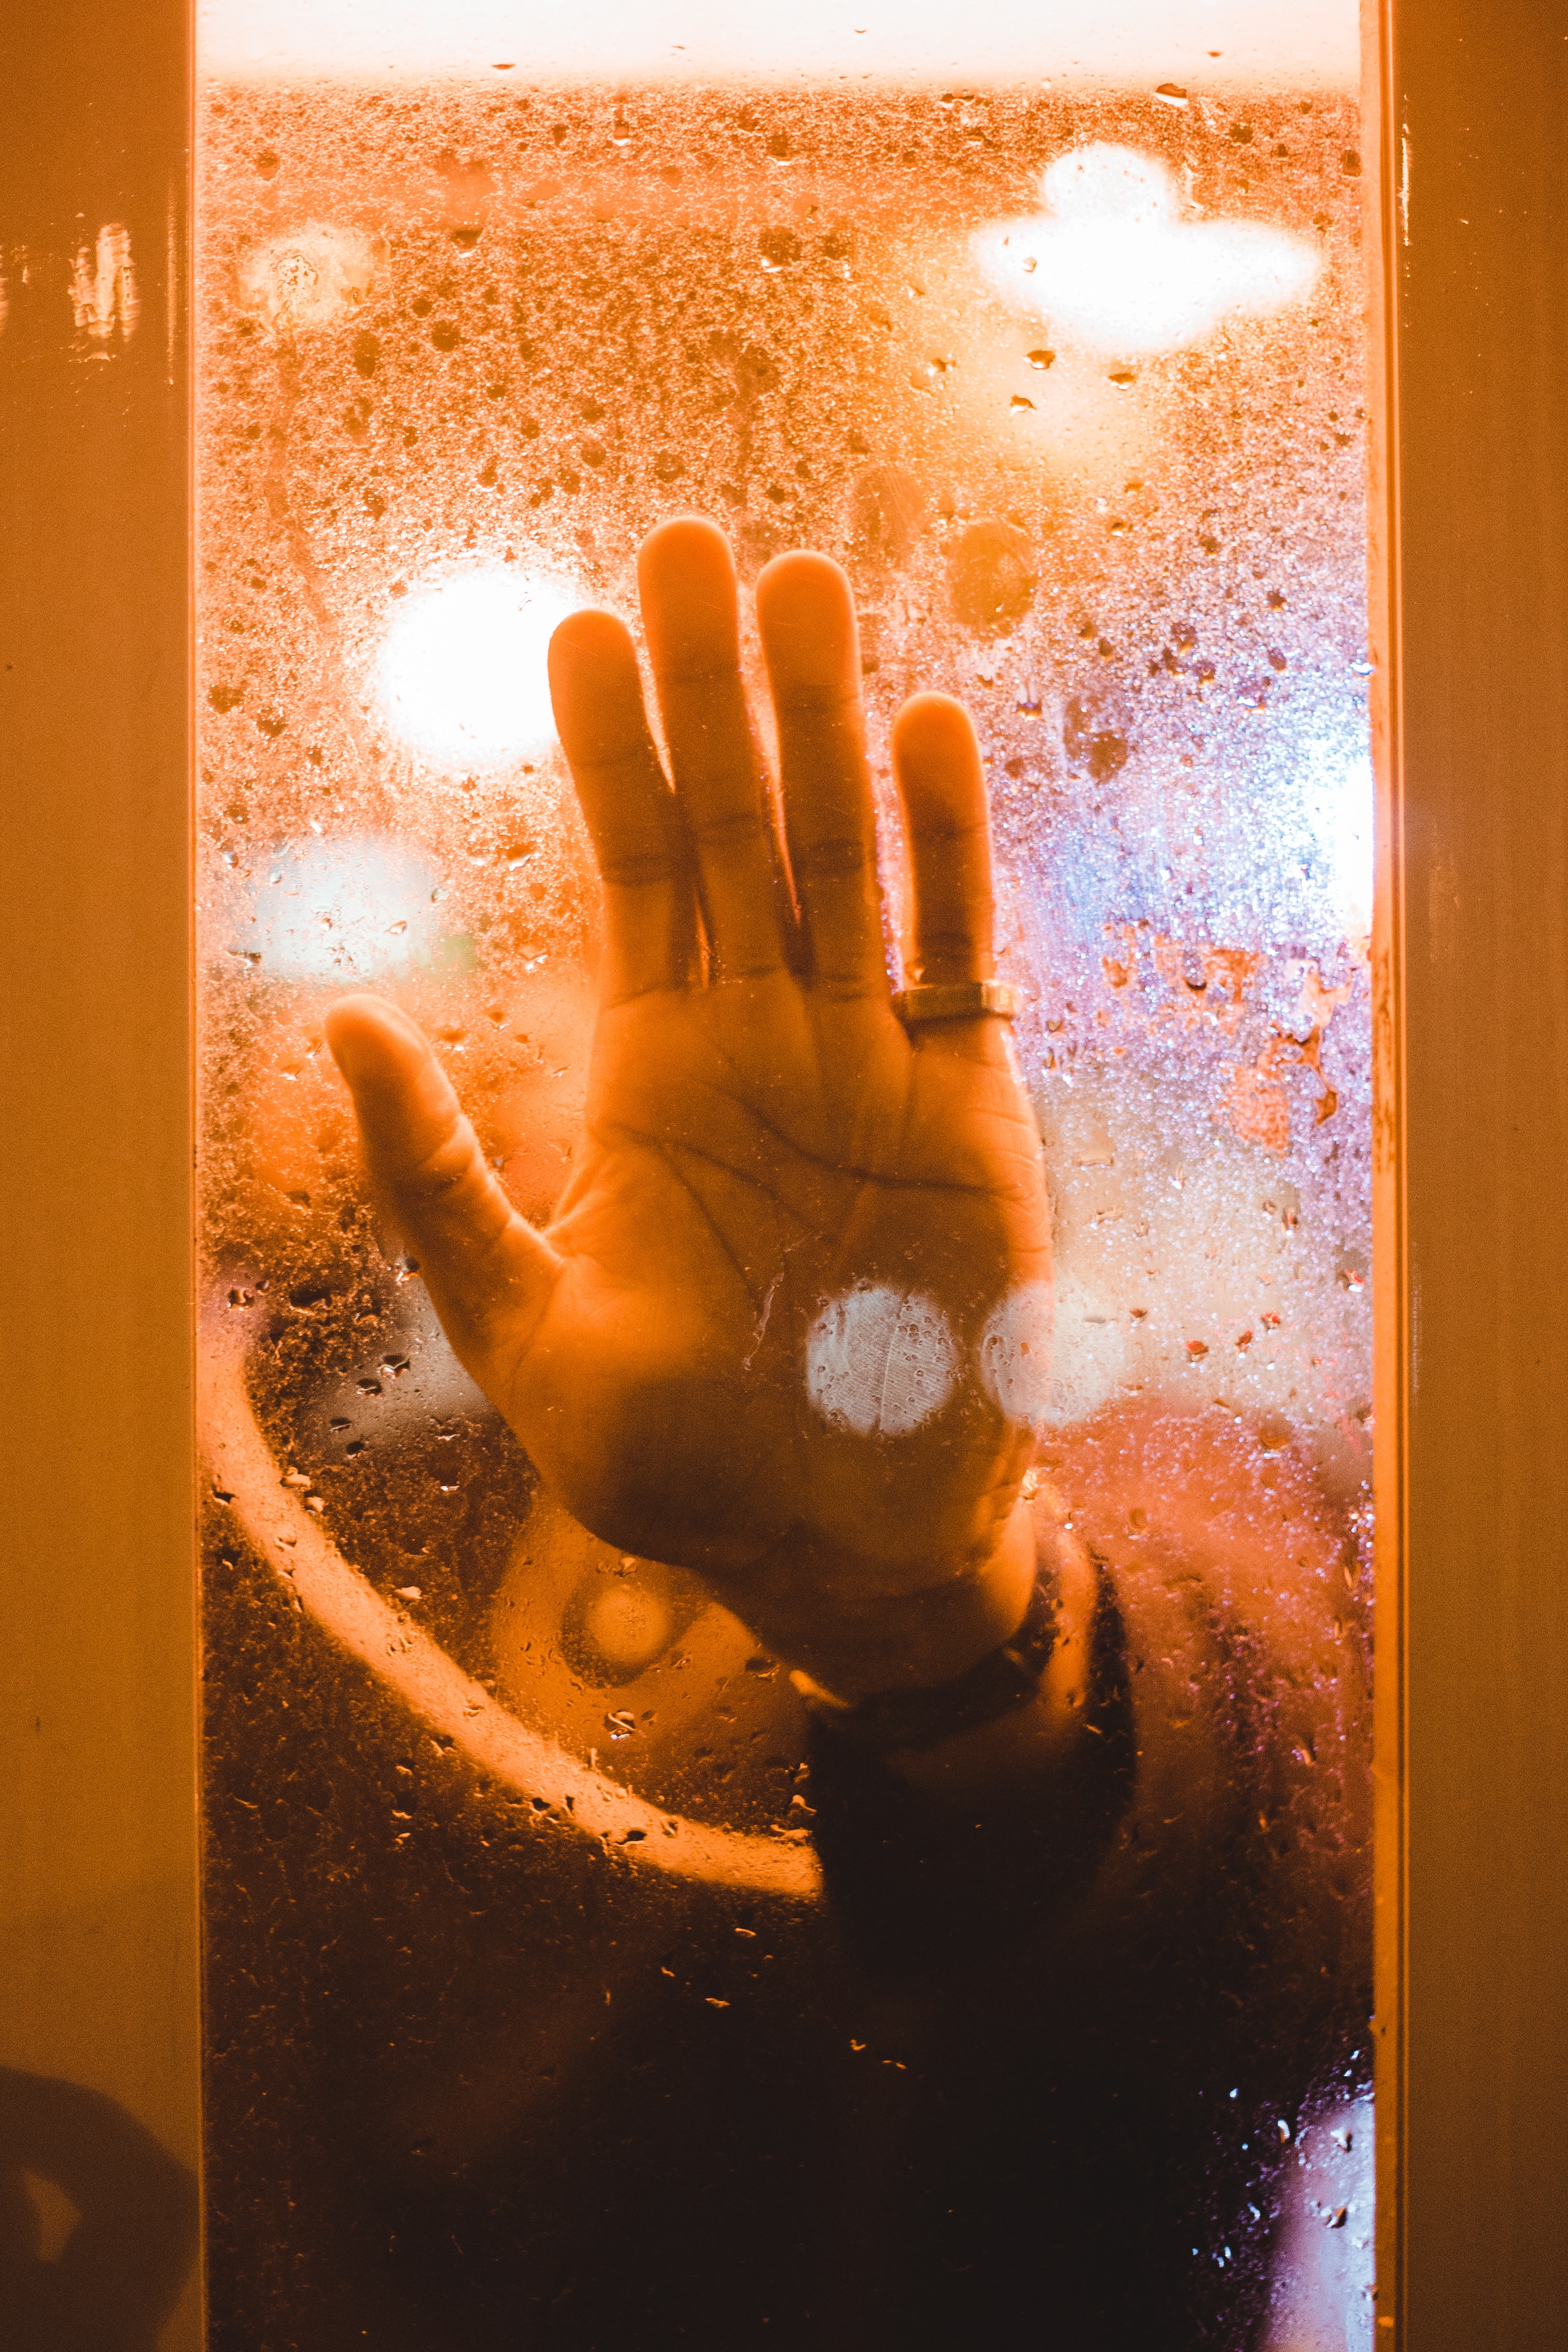 miscellanea, hand, miscellaneous, wet, palm, glass, fogged up, weeping